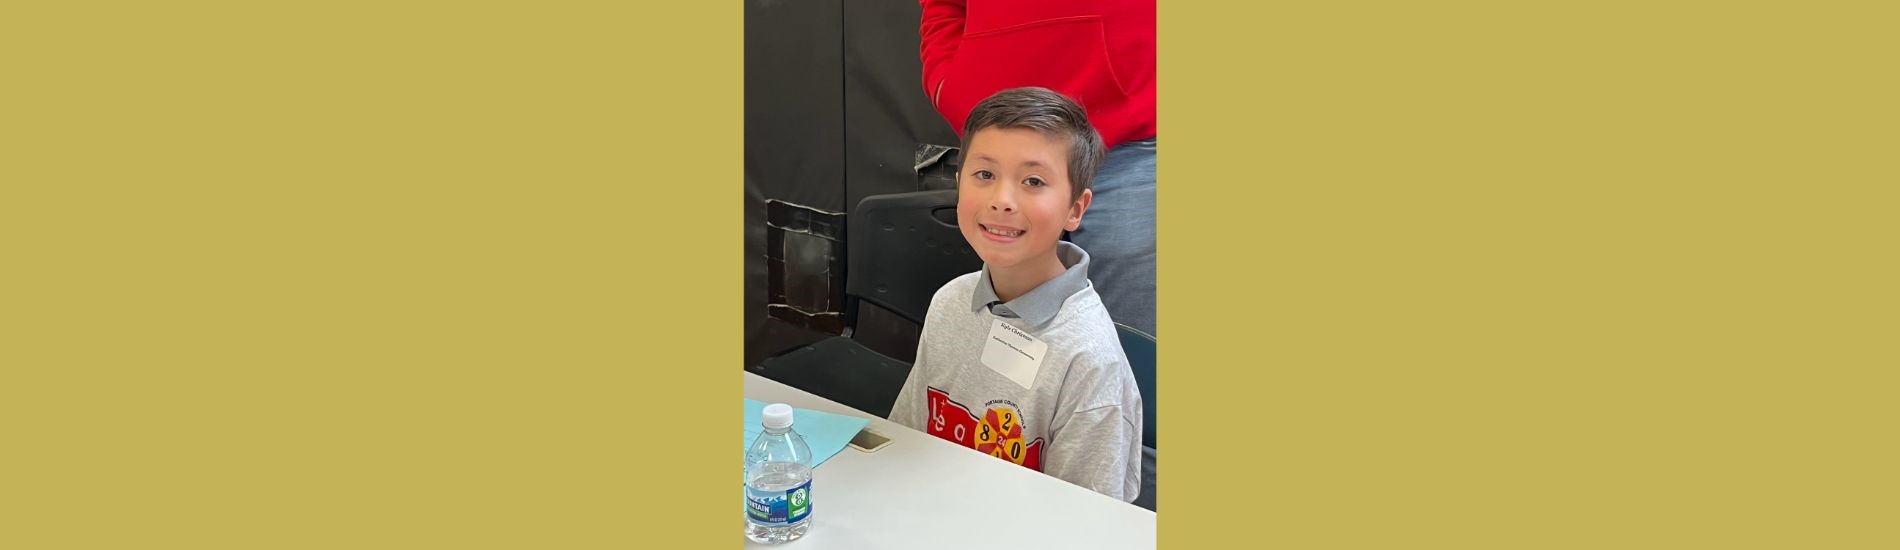 4th grader, Kyle Crisman, qualified recently for the final round of Math 24 competition.